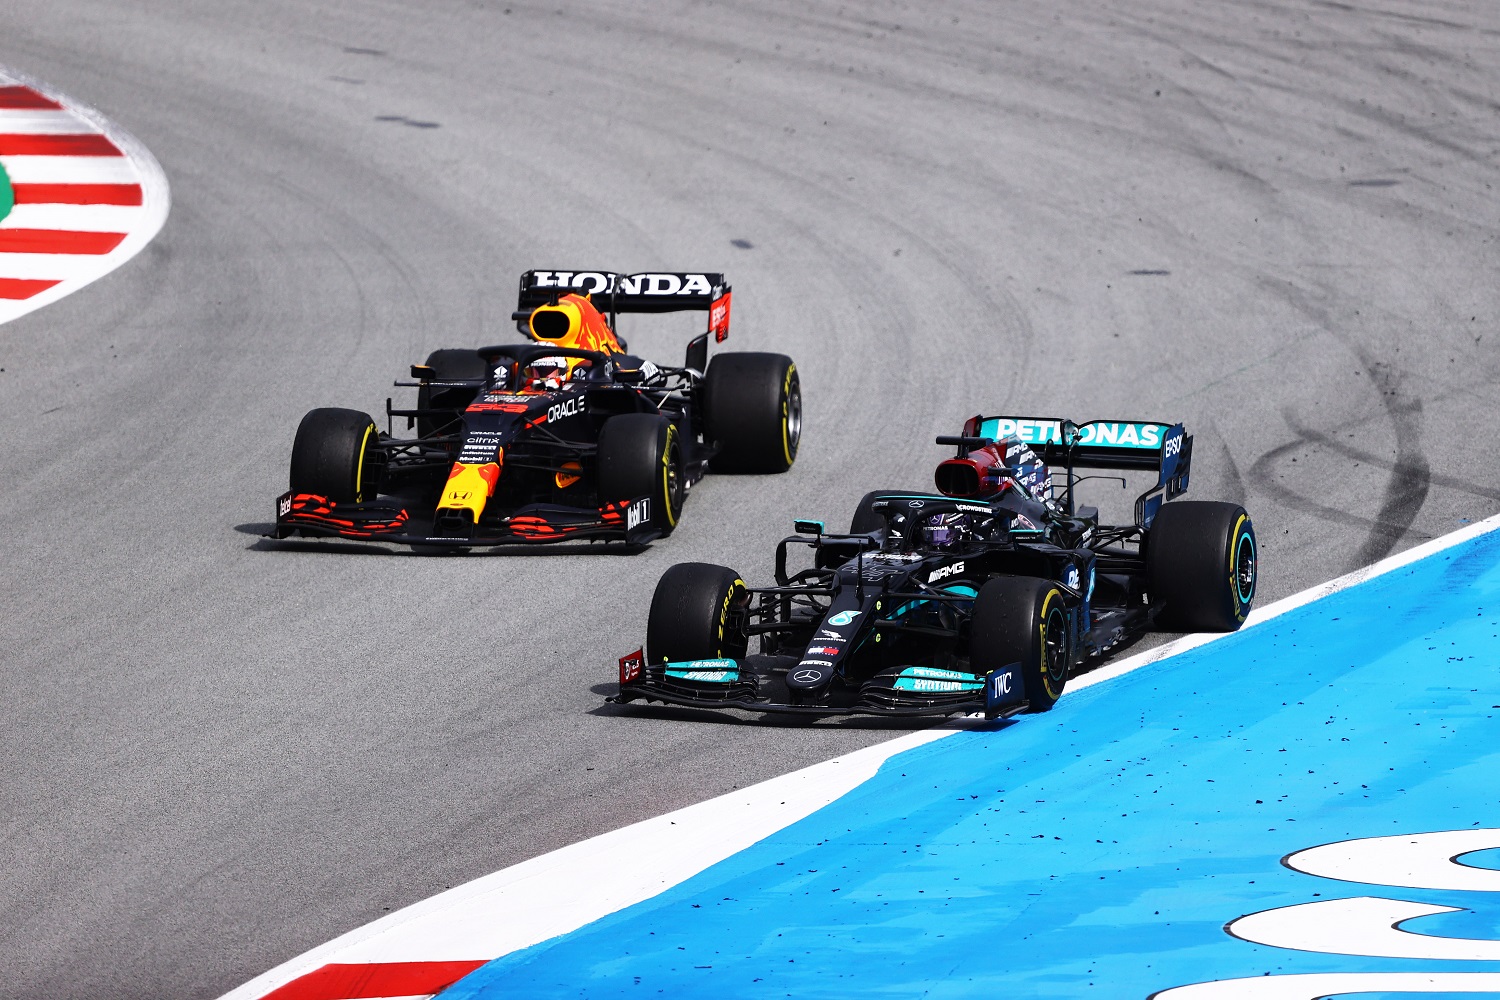 Max Verstappen and Lewis Hamilton battle for the lead during the Formula 1 Grand Prix of Spain on May 9, 2021.